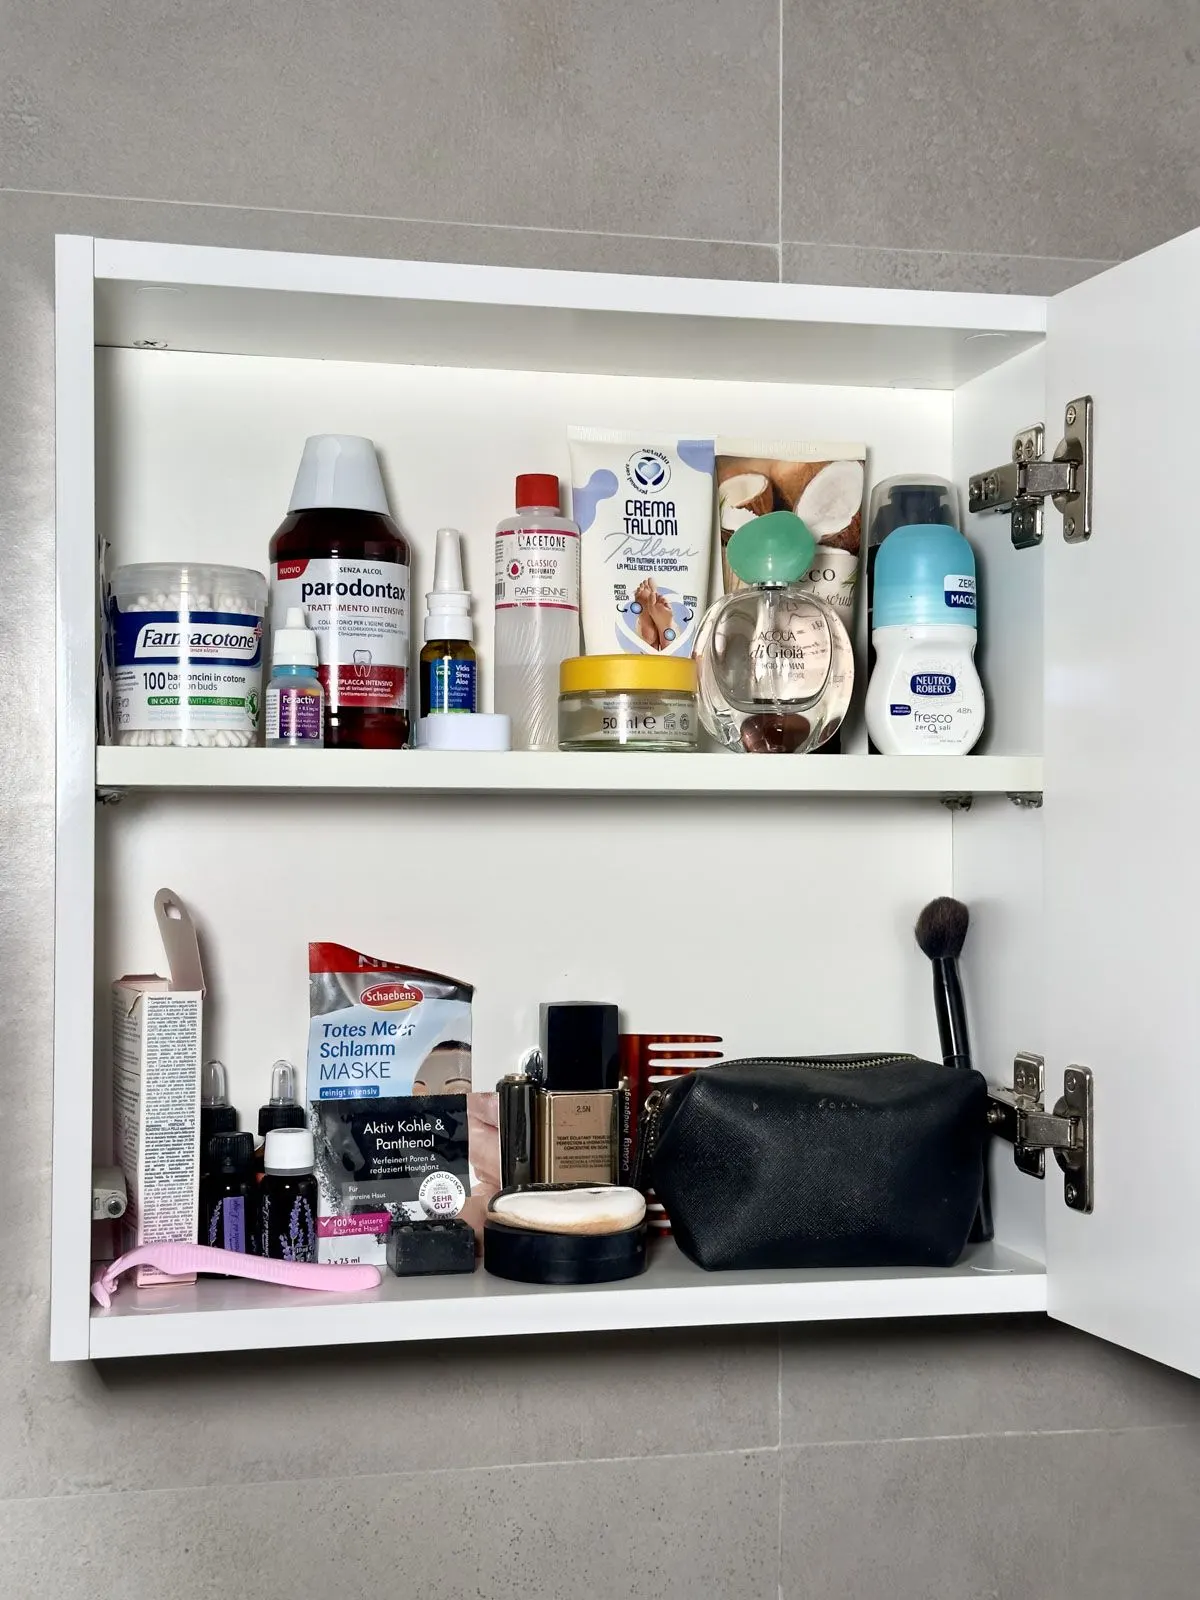 Use Cabinets To Hide The Products